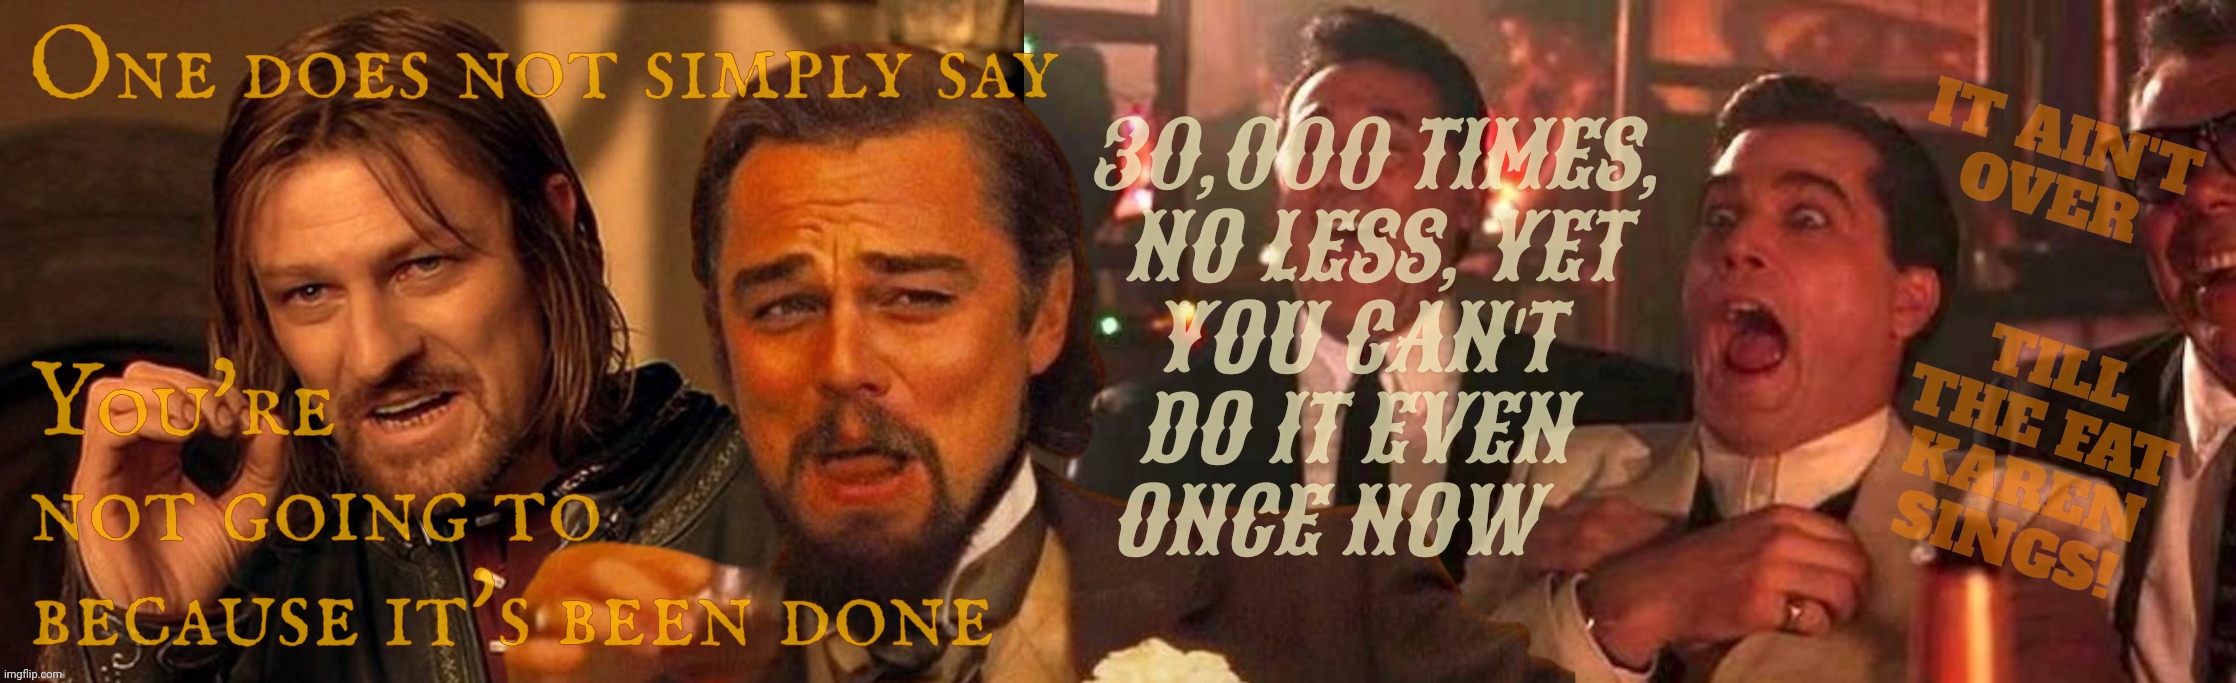 MAGAtronic shills don't have to supply proof because it's already been done a gazillion times already, don'tchaknow? | IT AIN'T
OVER; One does not simply say; 30,000 TIMES,
NO LESS, YET
YOU CAN'T  
DO IT EVEN  
ONCE NOW; You're
not going to
because it's been done; TILL
THE FAT
KAREN
SINGS! | image tagged in one does not simply laughing leo goodfellas laughing,maga logic,magas gotta maga,magatronics,magatronic logic,maga | made w/ Imgflip meme maker